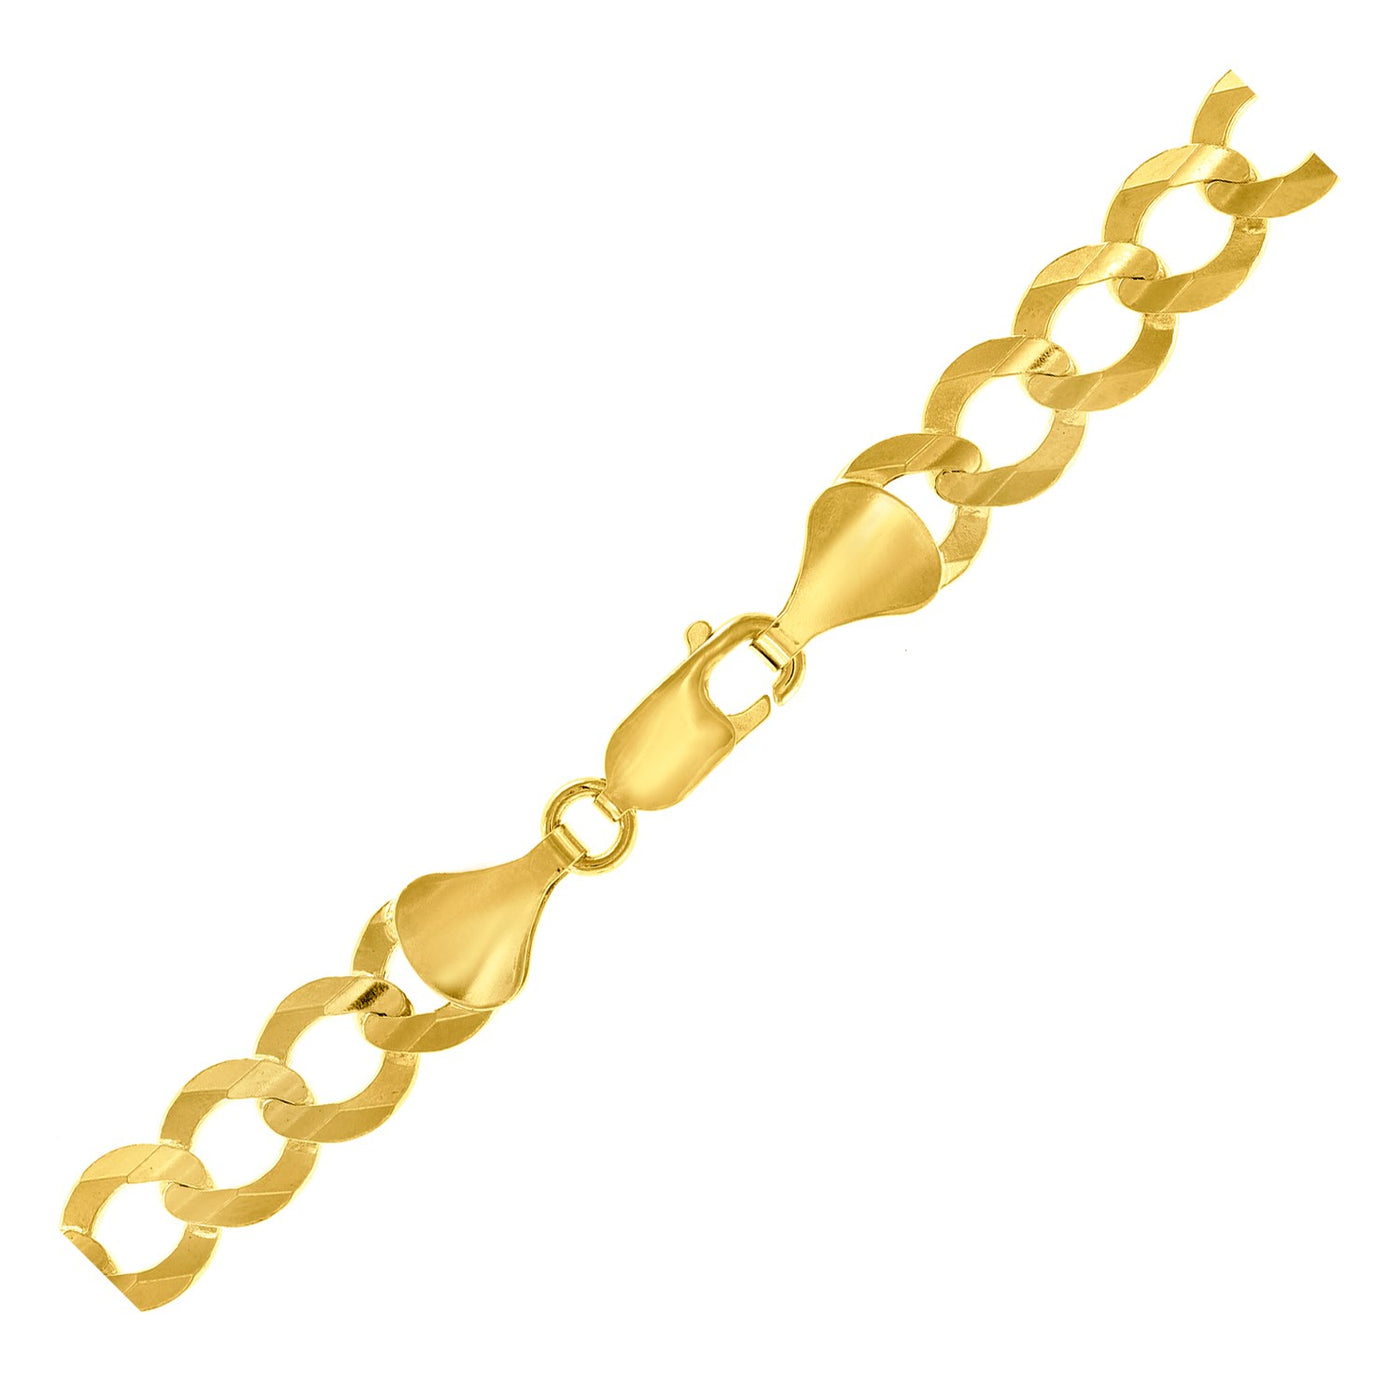 8.2mm 14k Yellow Gold Solid Curb Chain